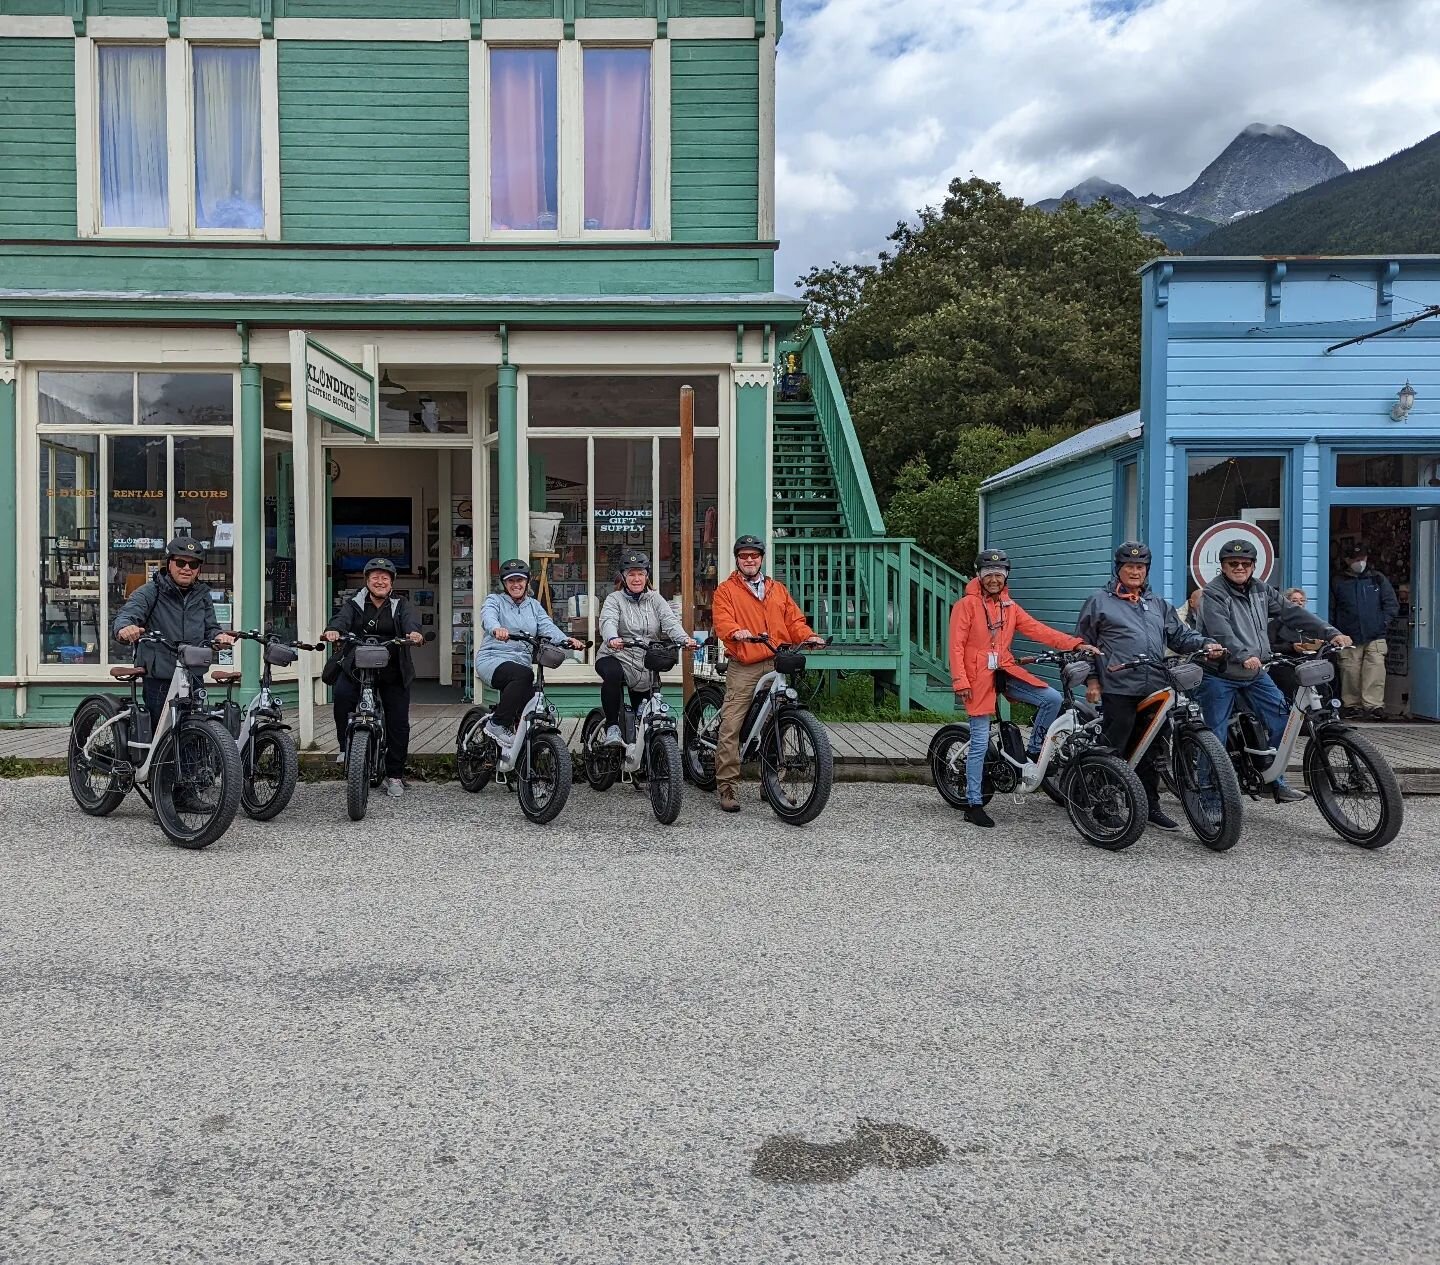 We love when other people/tour providers refer people to us!

Special thanks to @valdezstayandplay for letting these riders know about us while they were riding in Valdez.  They loved their e-bike experience so much in Valdez that they came to ride w